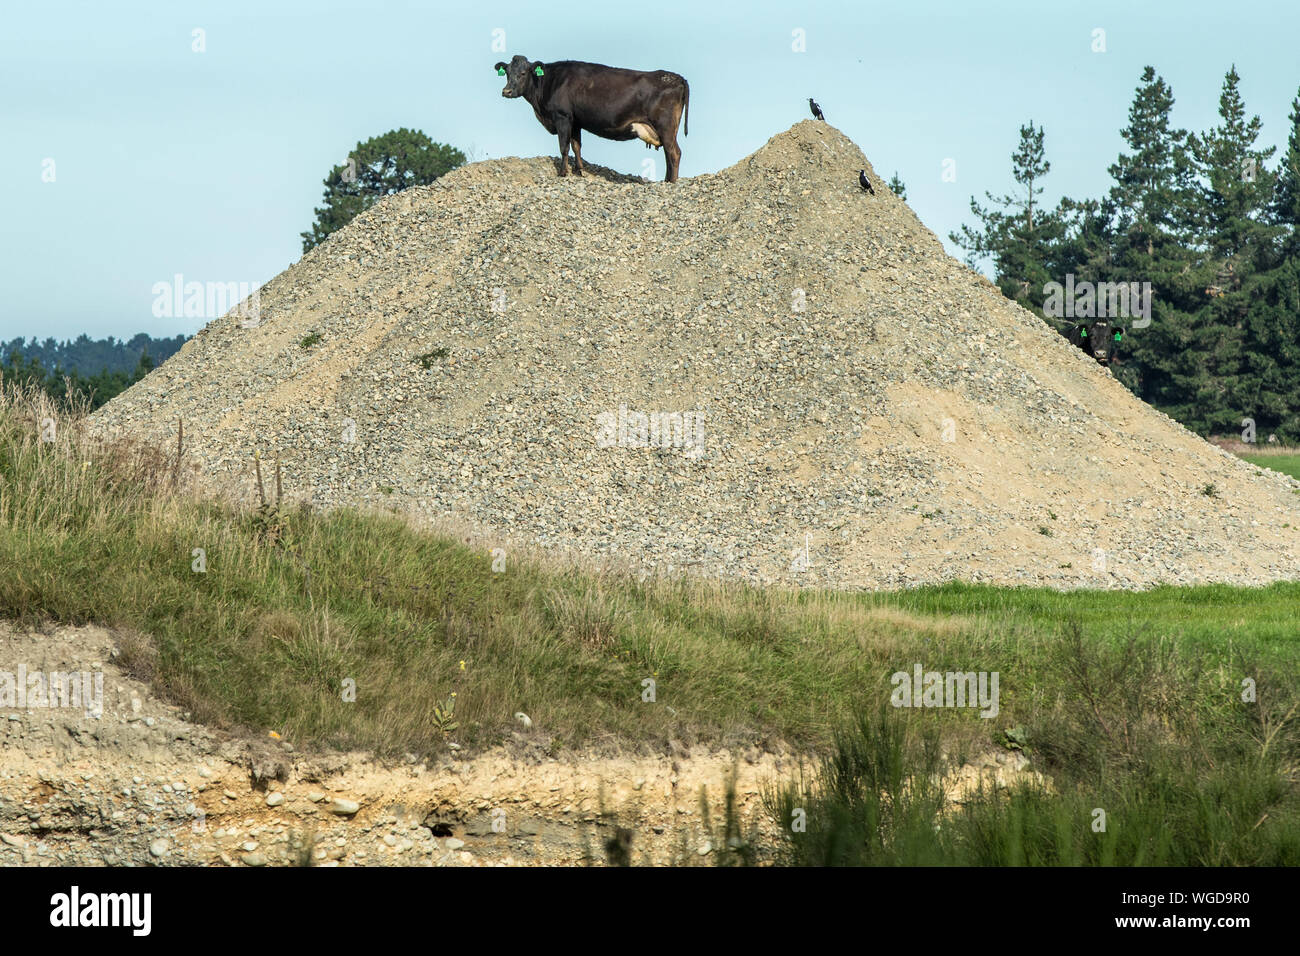 Cow Standing On Top Of Sand Hill Stock Photo